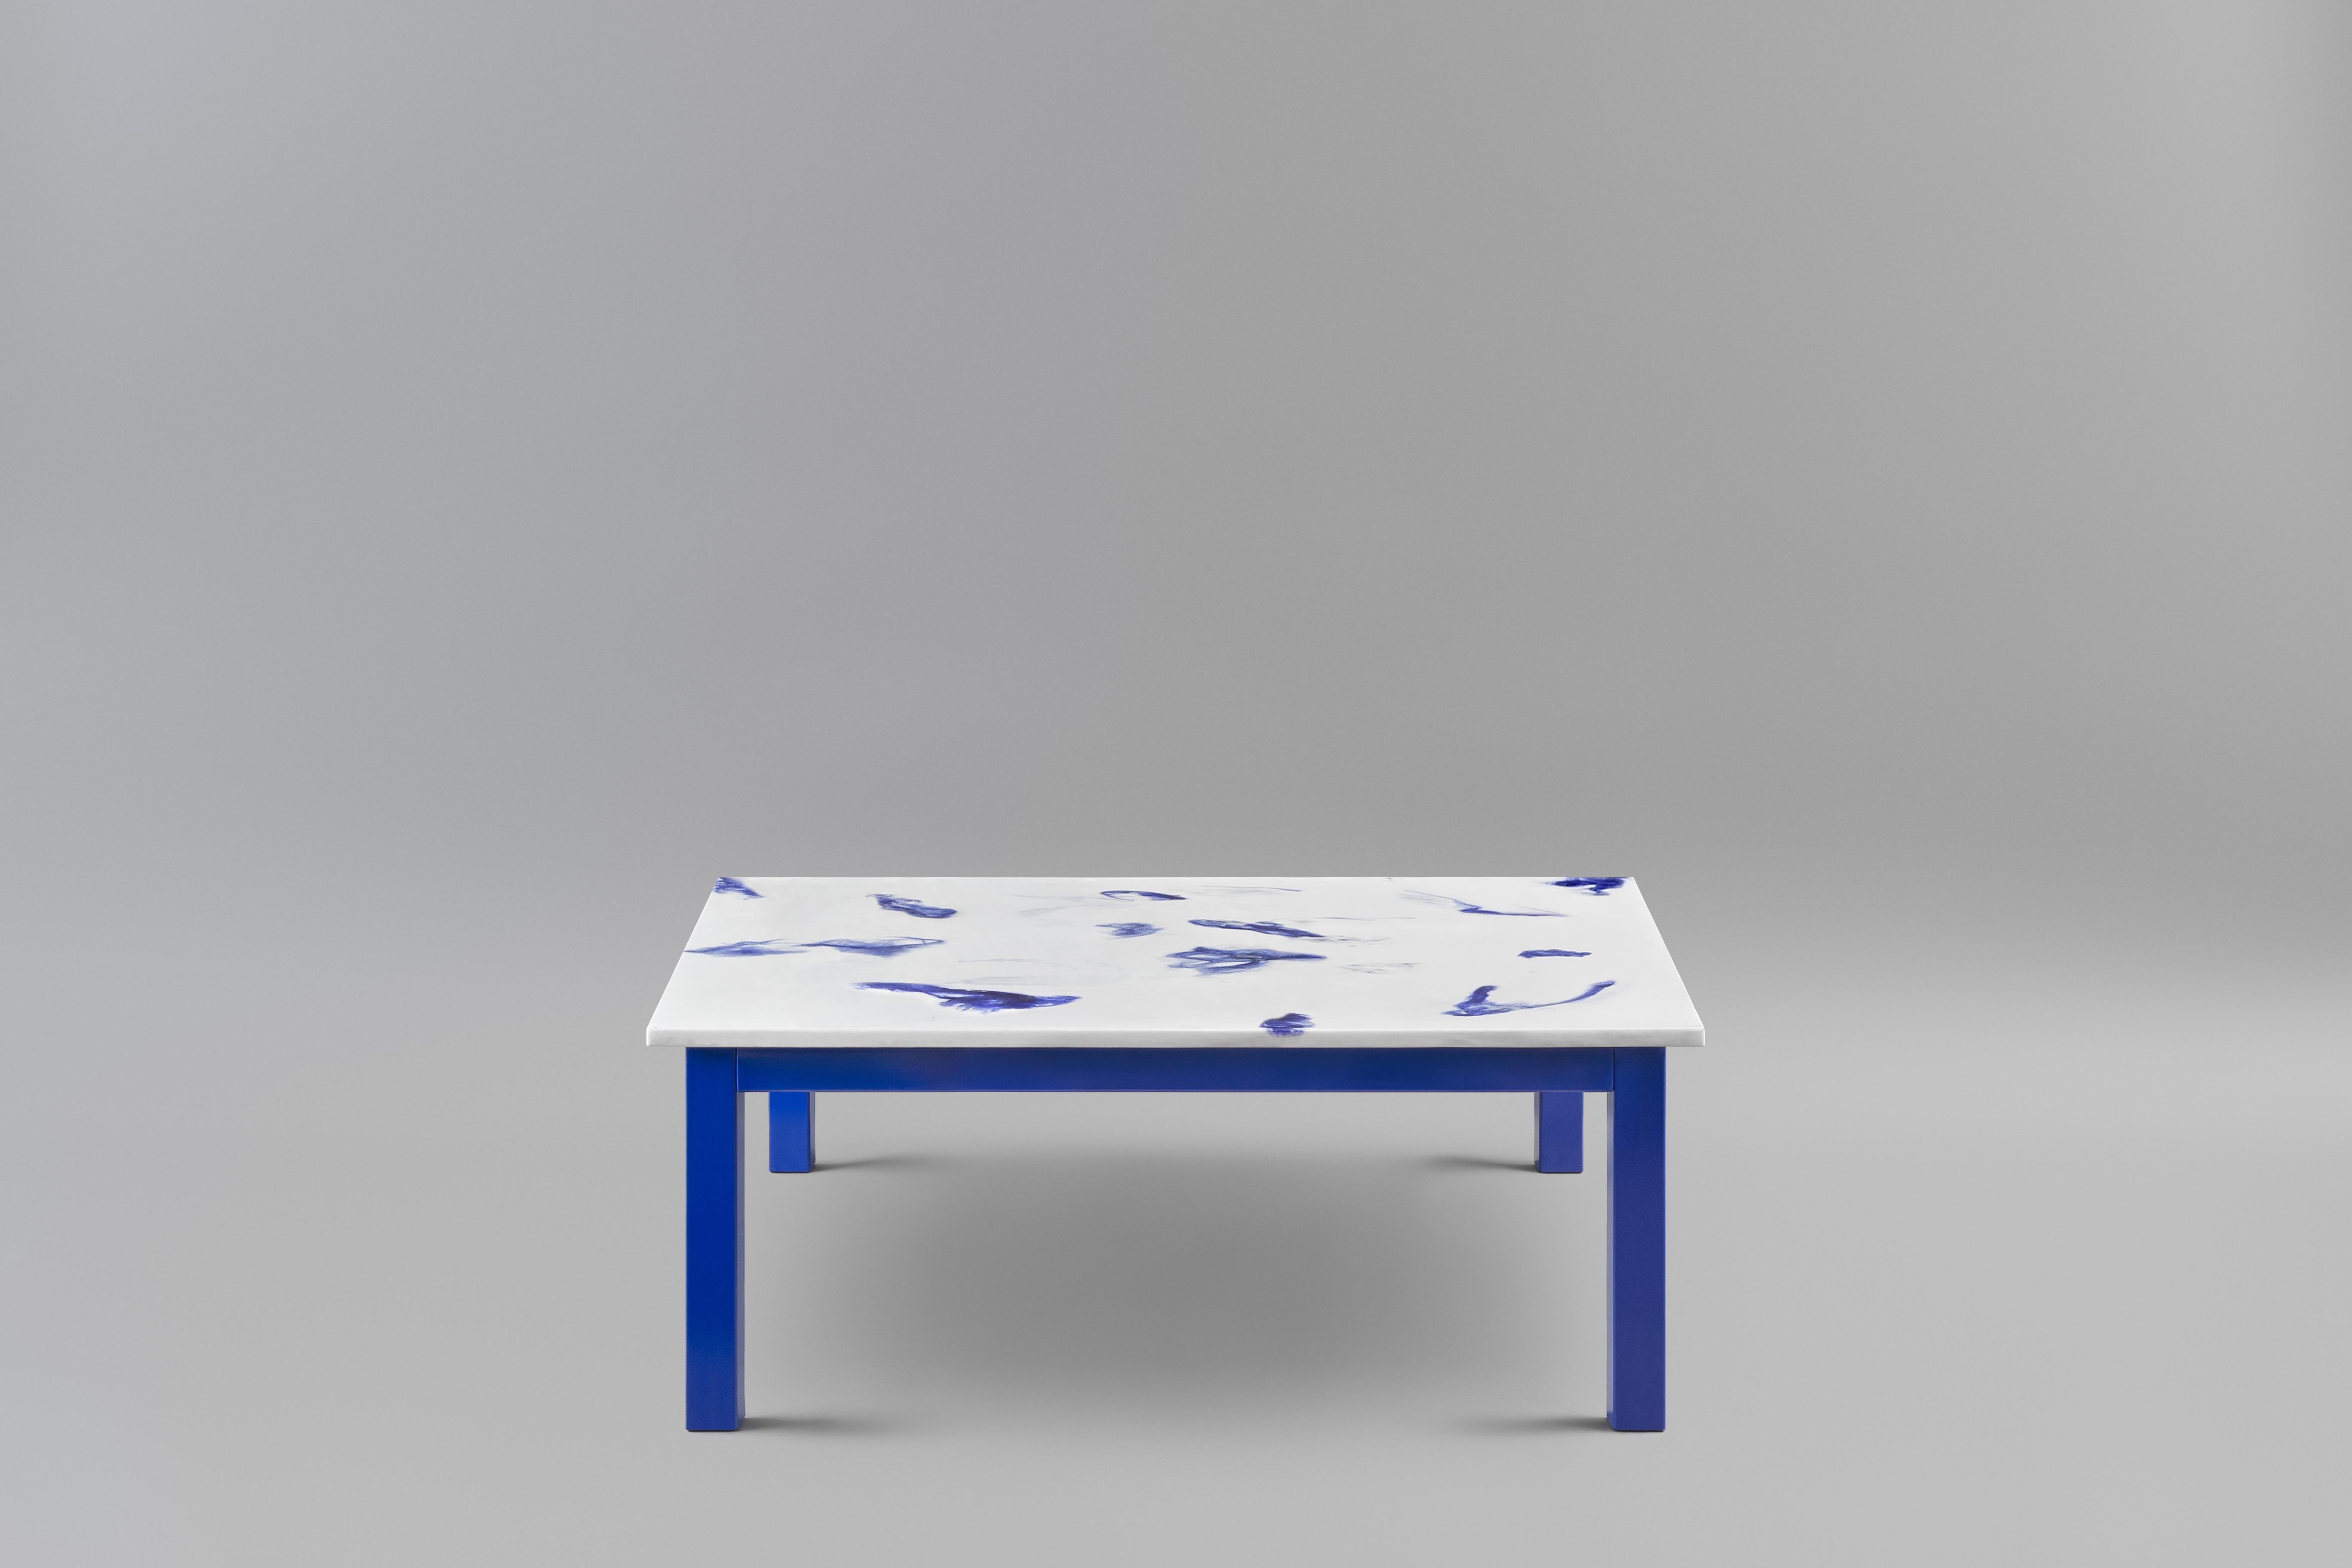 The Fluent coffee table.
The table top is made in Marwoolus material with blue wool fibers and white Carrara marble powder base.
The steel frame structure is blue powder coated.

Material info:
Marwoolus is a new material invented by Marco